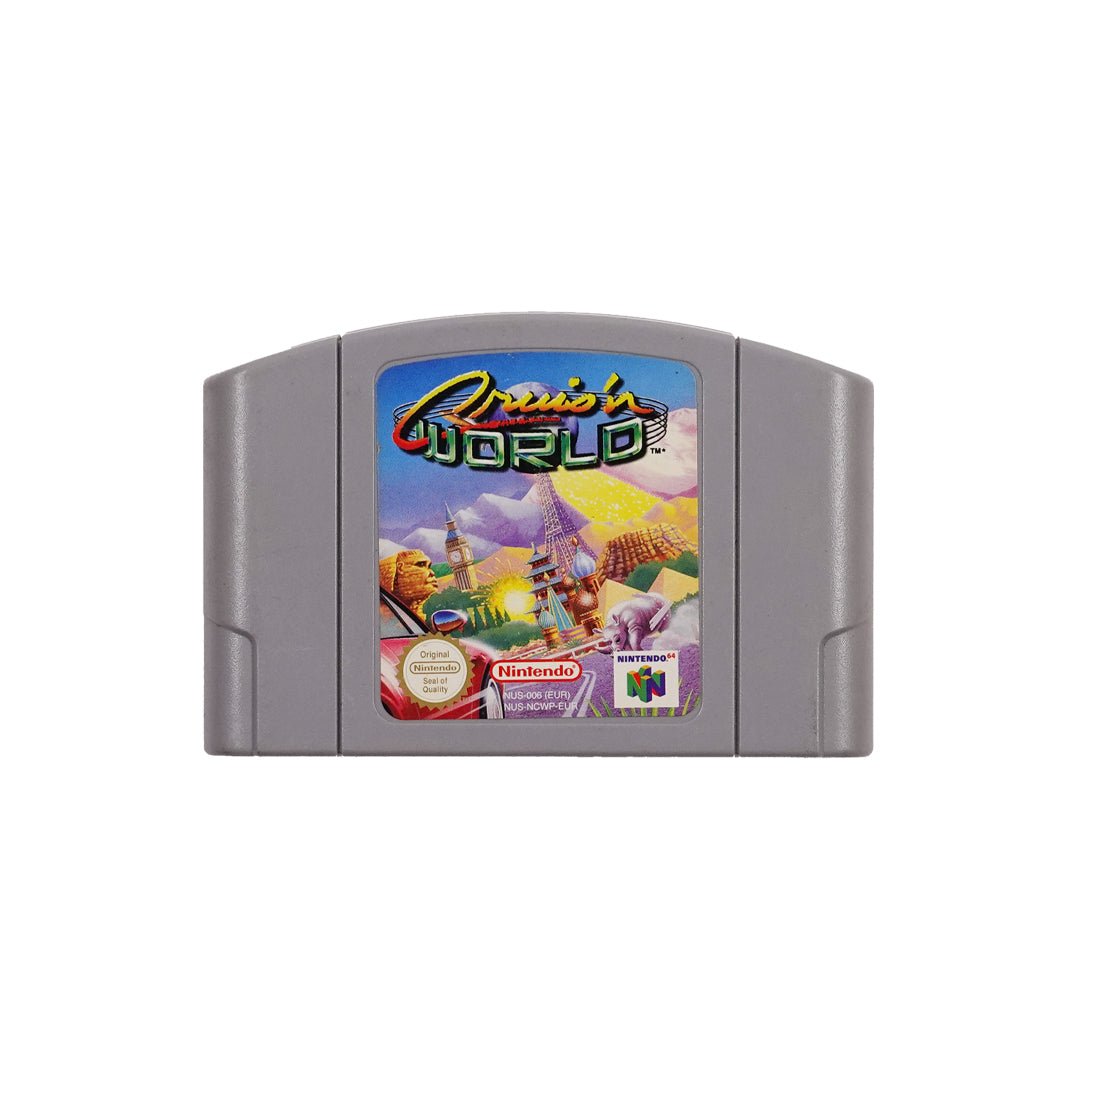 (Pre-Owned) Cruis'n World - Nintendo 64 - Store 974 | ستور ٩٧٤